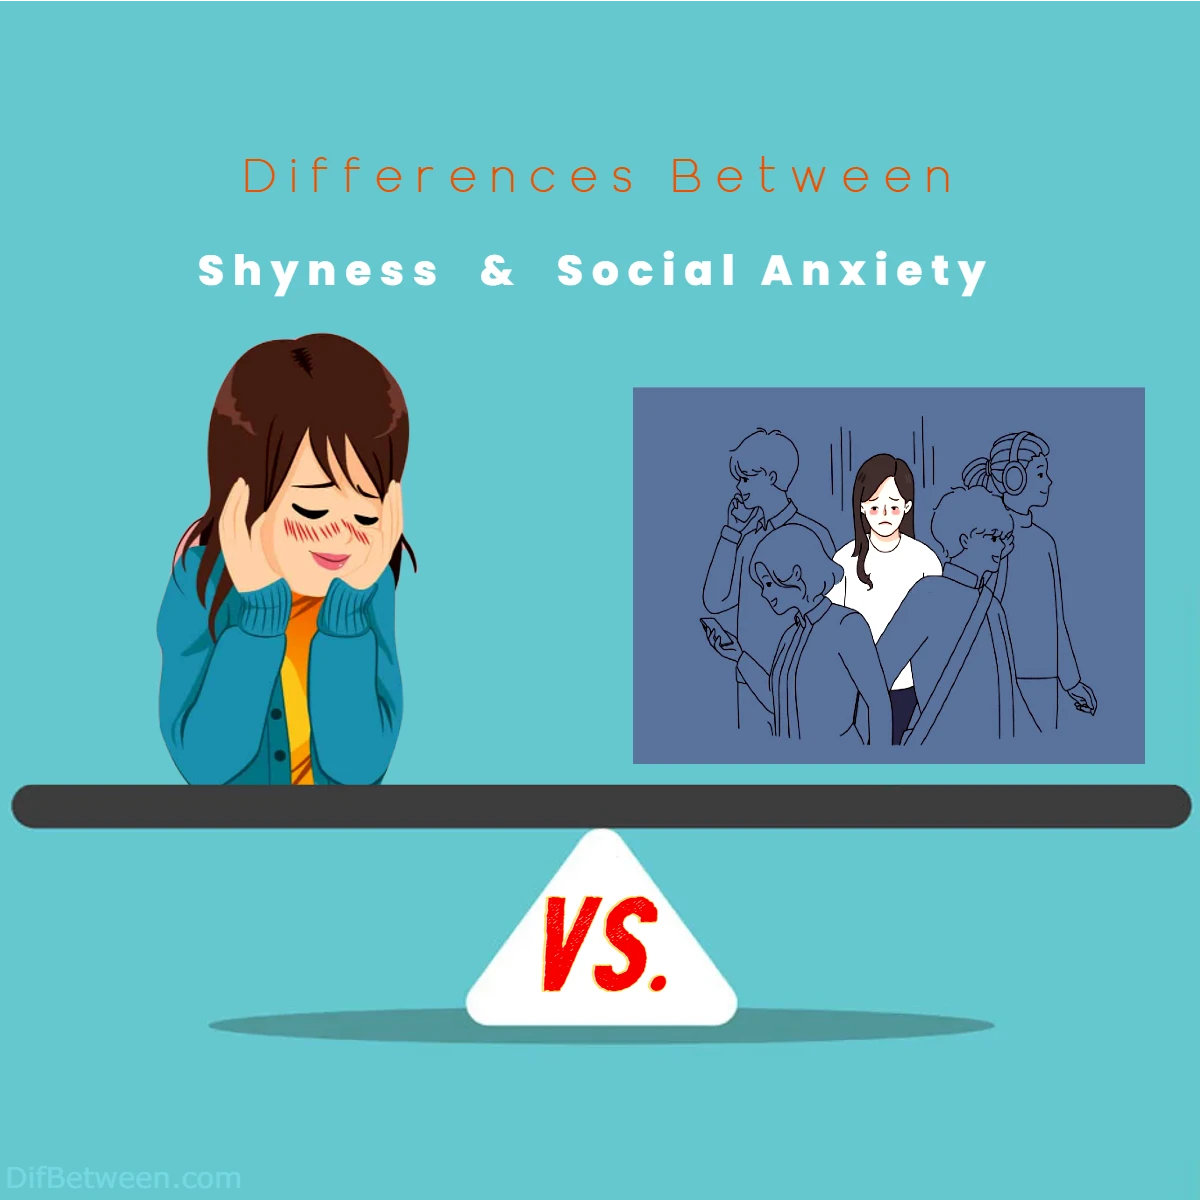 Differences Between Shyness vs Social Anxiety